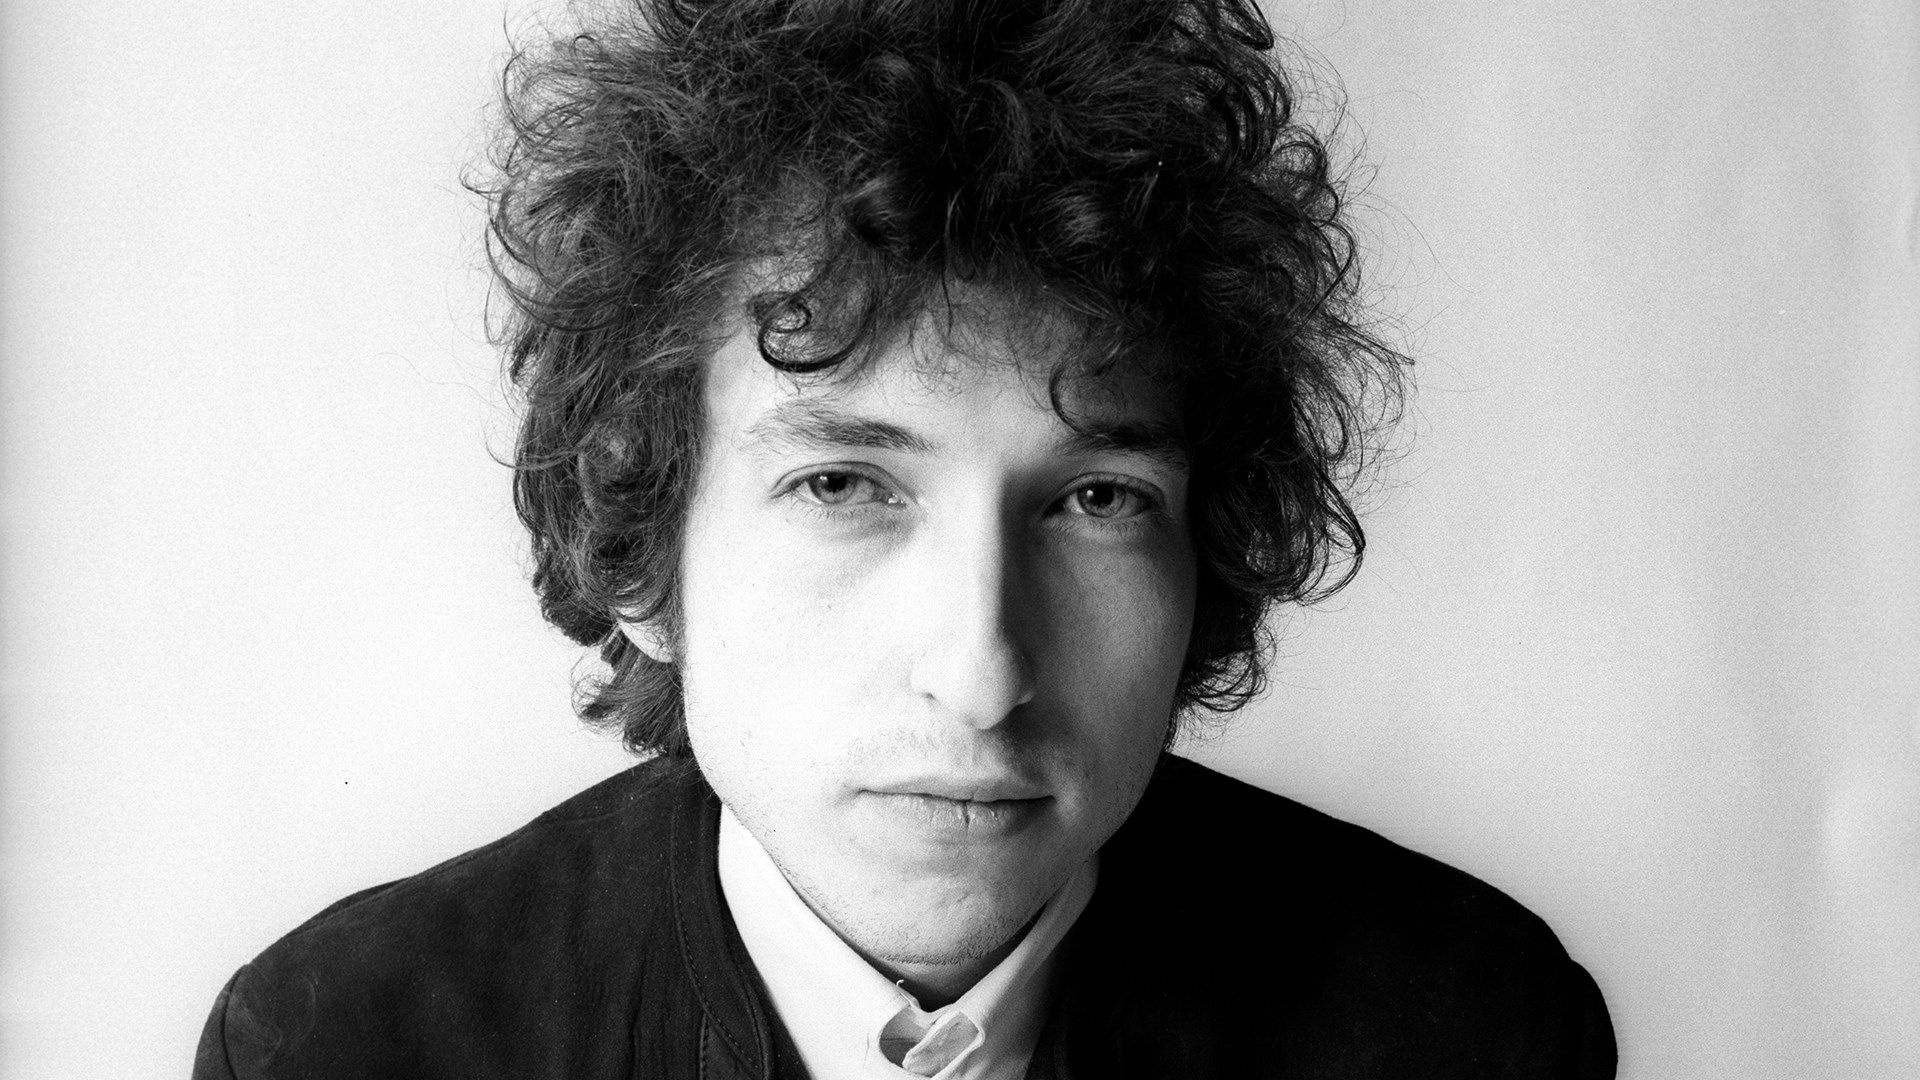 Bob Dylan: Jewish American singer, musician, and songwriter, widely regarded as one of the greatest and most popular in American history. 1920x1080 Full HD Wallpaper.